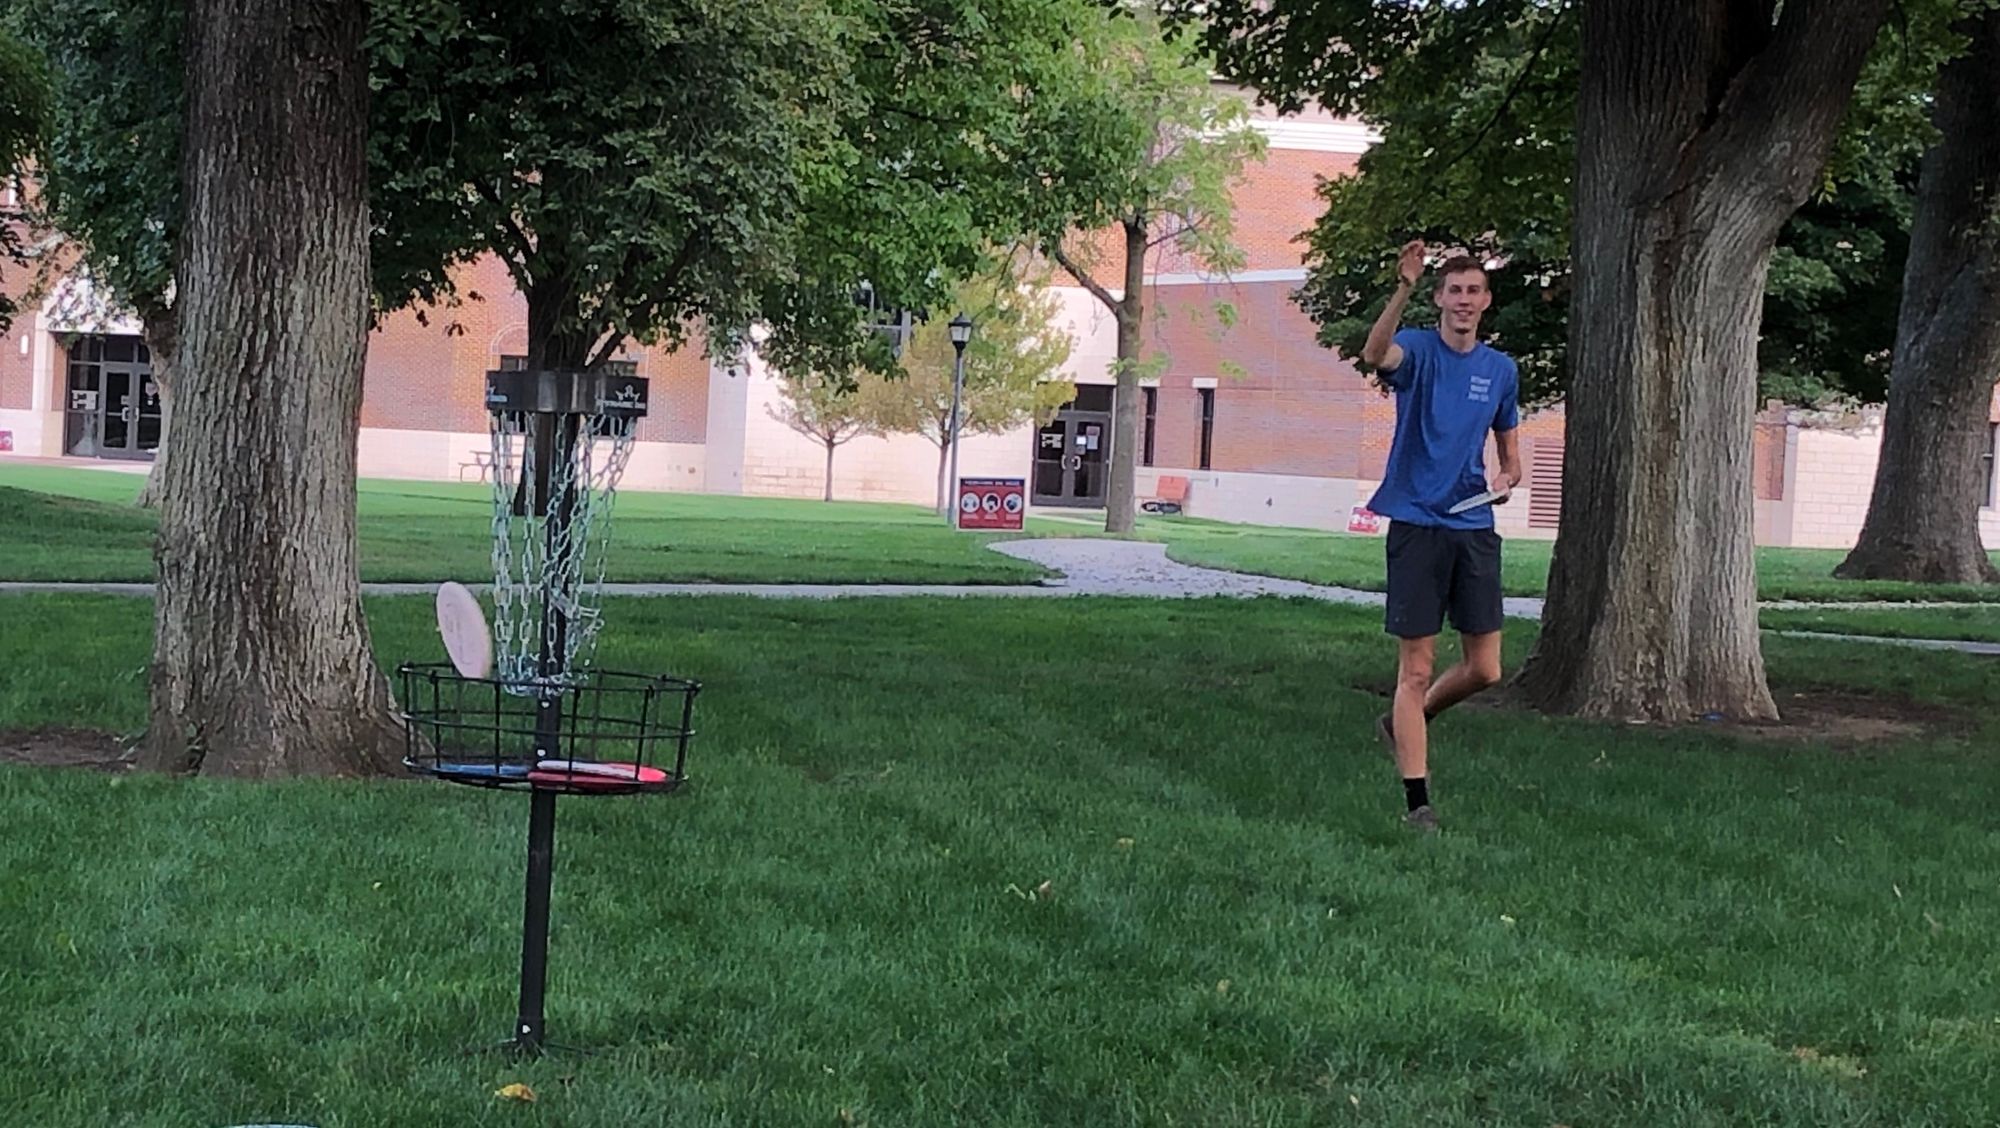 New campus club introduces Newman to disc golf